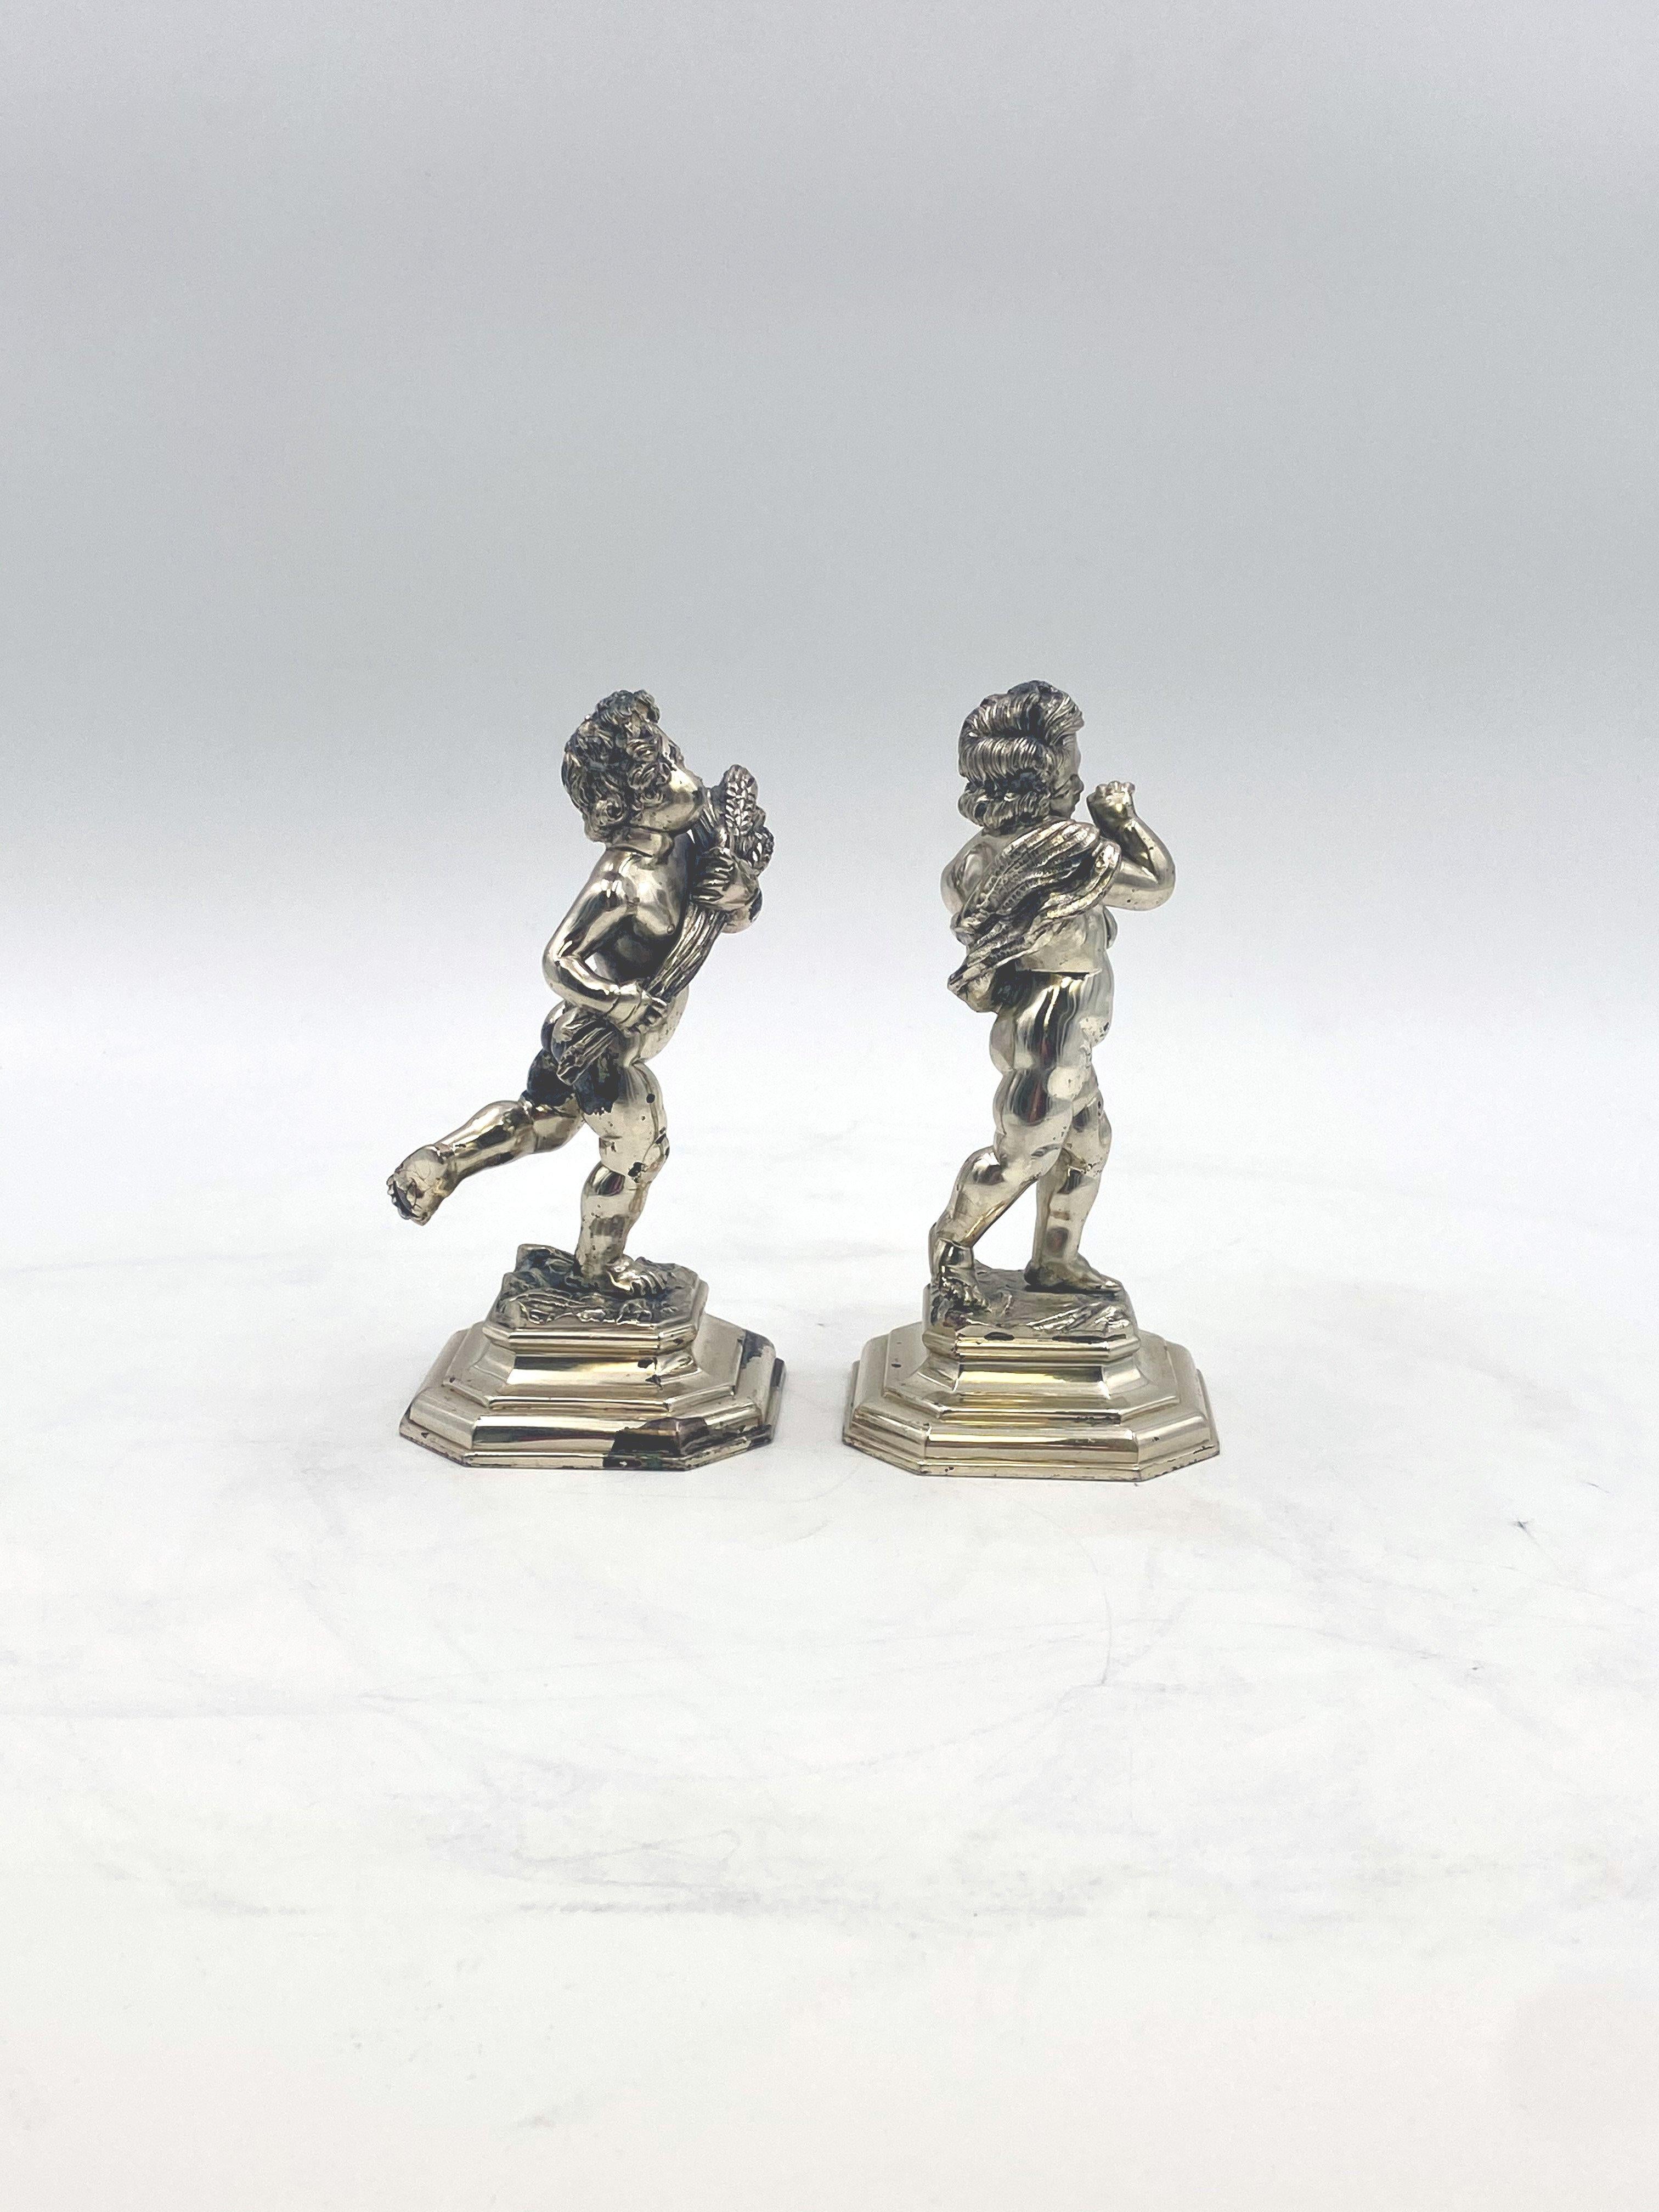 A pair of beautifully chased Italian solid 0.800 silver cherubs with two of the four seasons design. Made in the 20th century. Measurements: Height: 6 inches and Weight: 29.3 ounces. Bearing hallmarks as shown in images.

